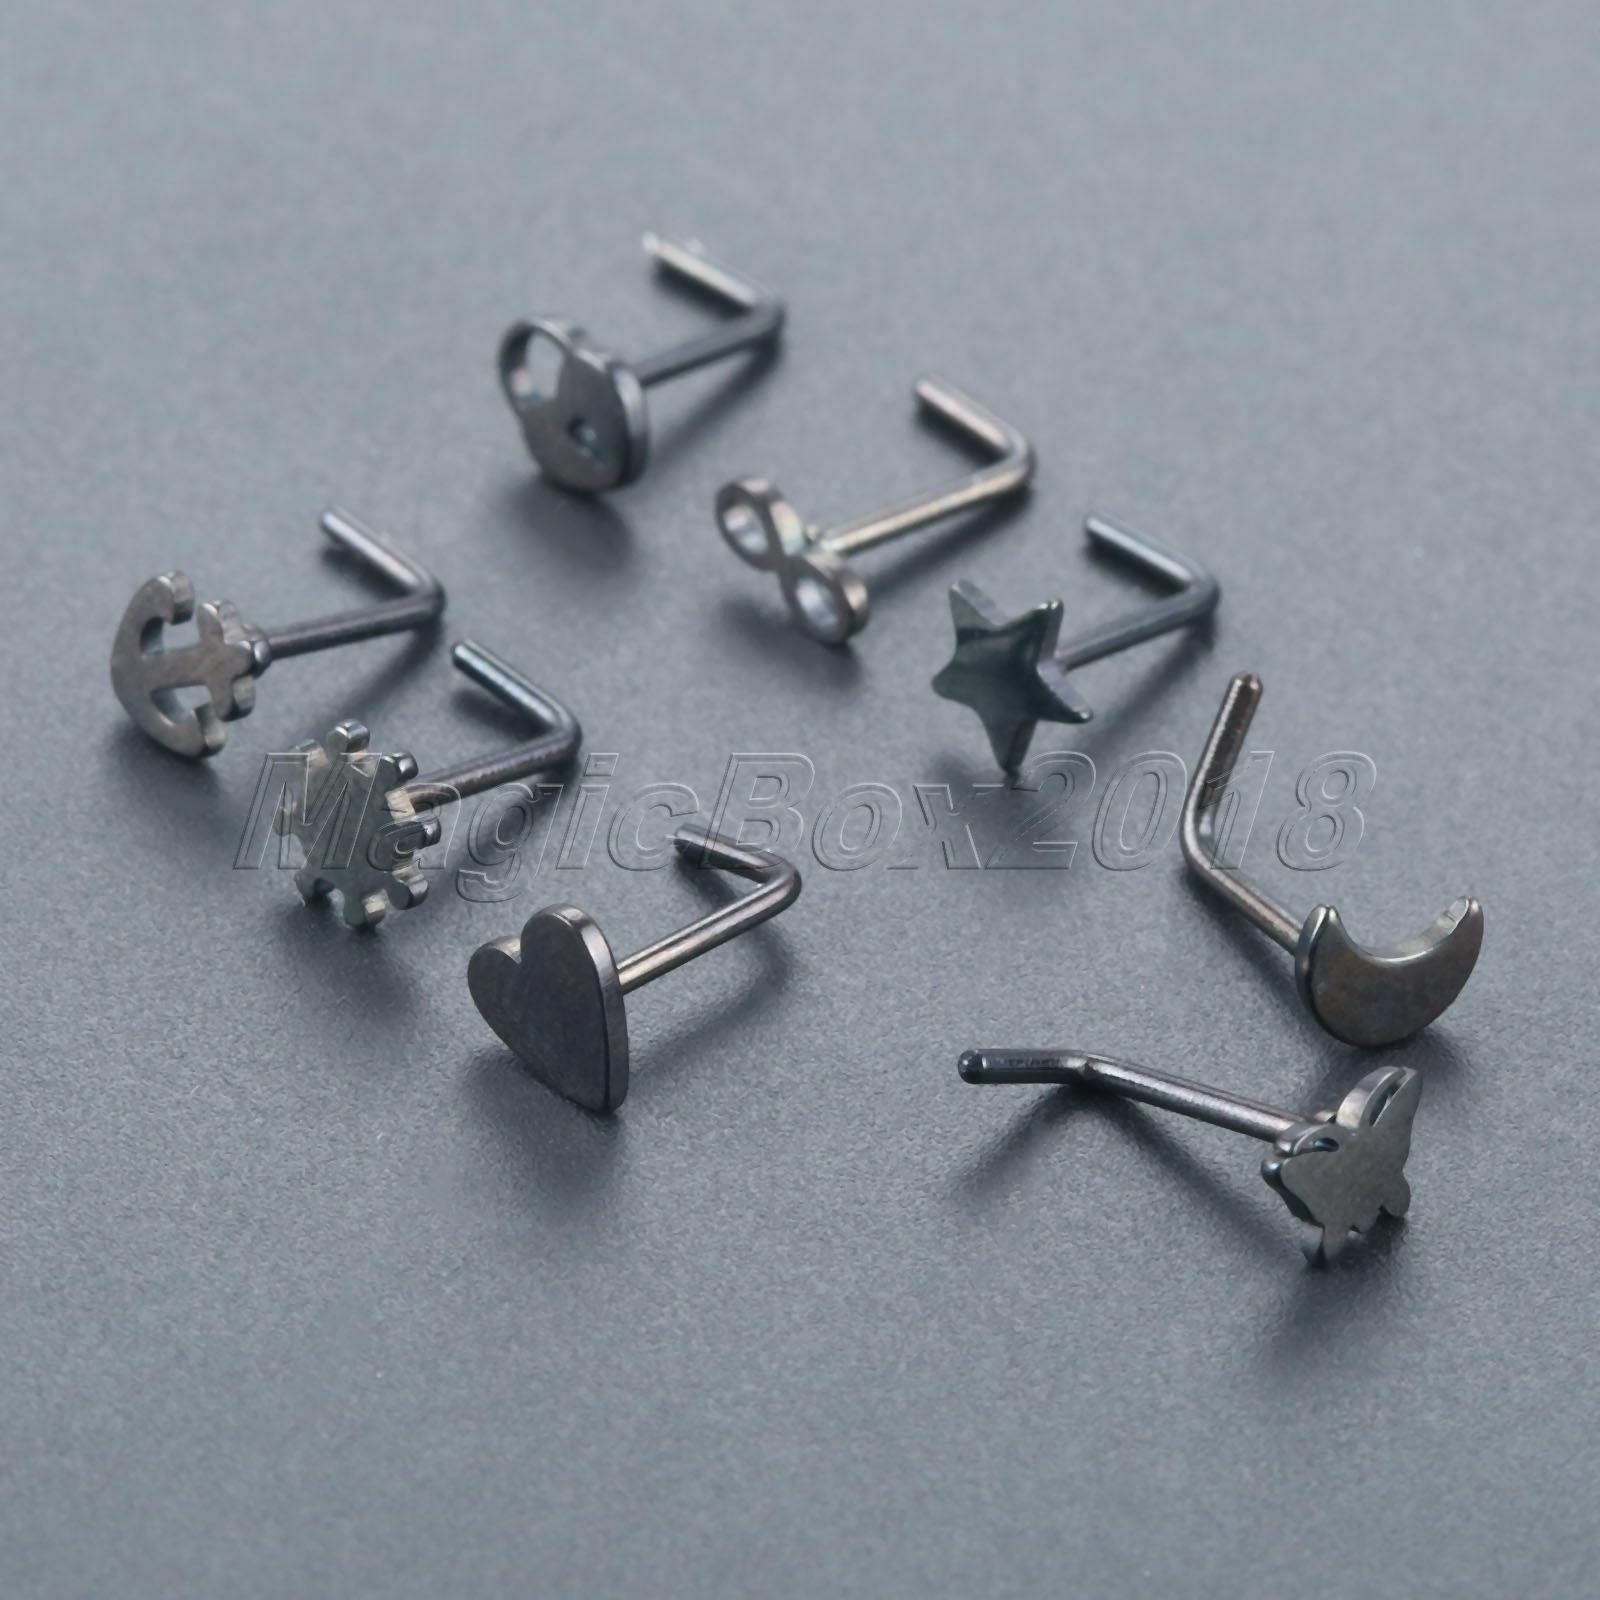 Stainless Steel L-Shape Nose Screw Nail Piercing Anchor Moon Star Heart Black